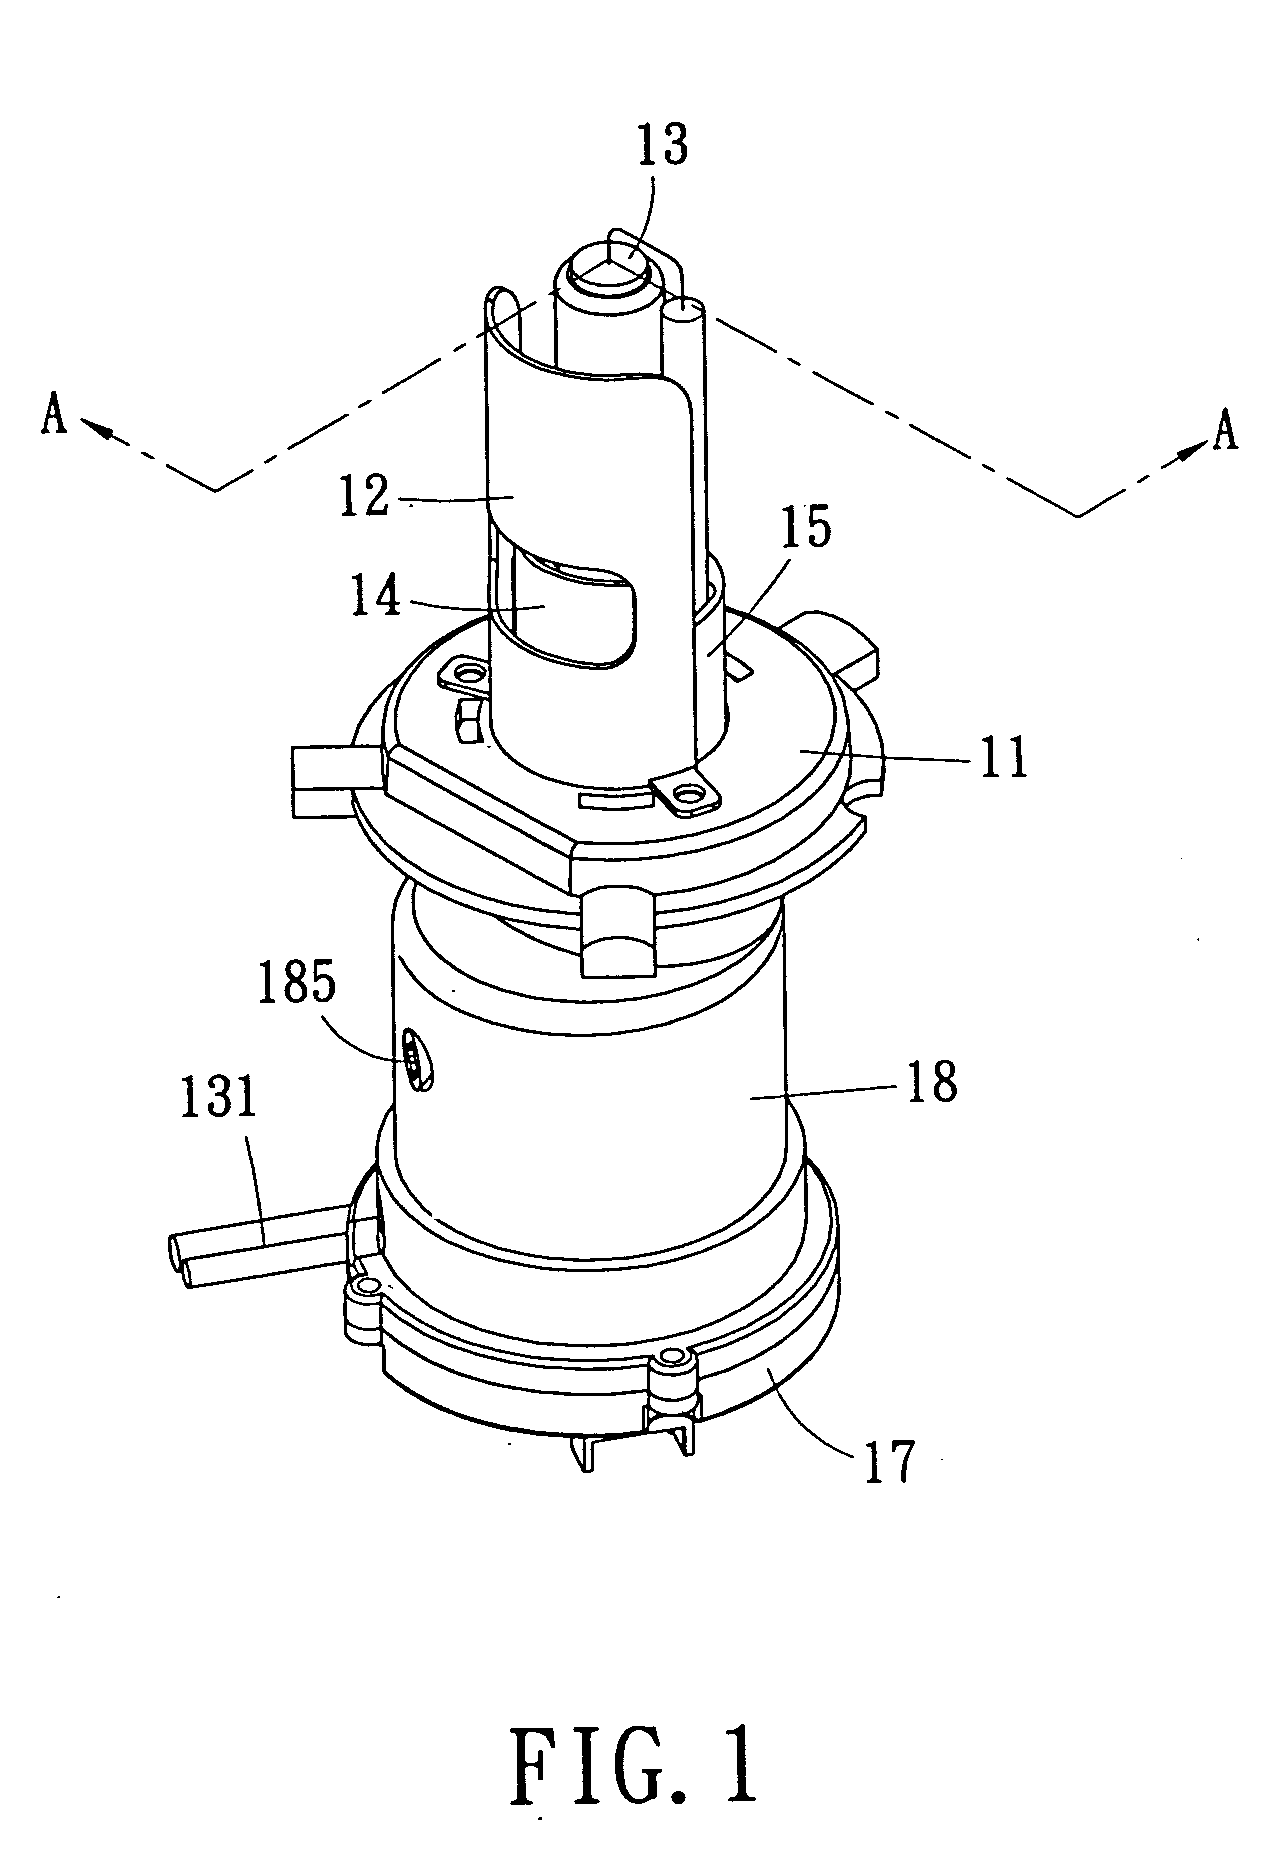 Adjusted structure of discharge headlight